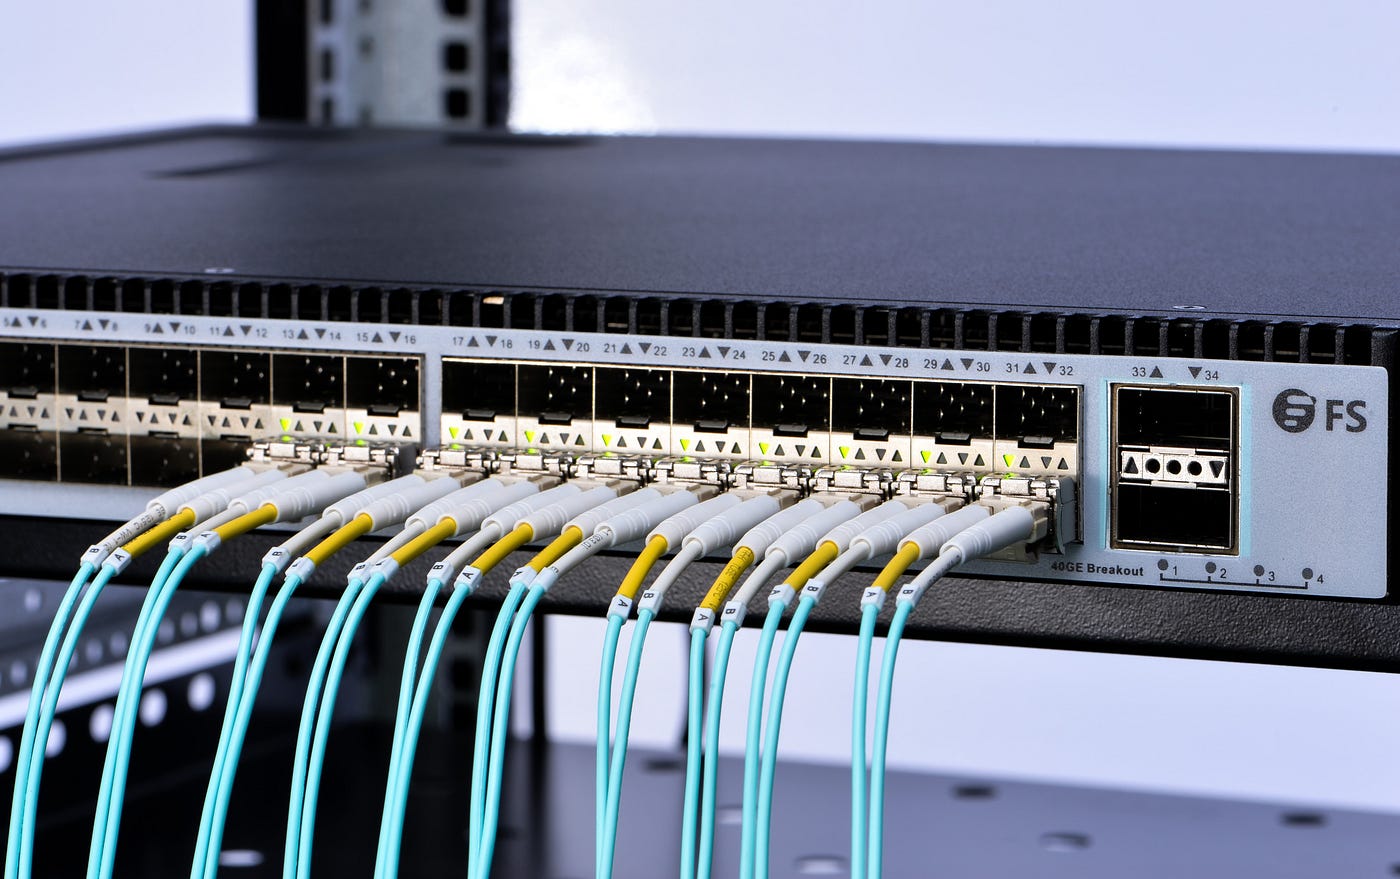 Patch Panel vs Switch: What's the Difference? | by Sylvie Liu | Medium